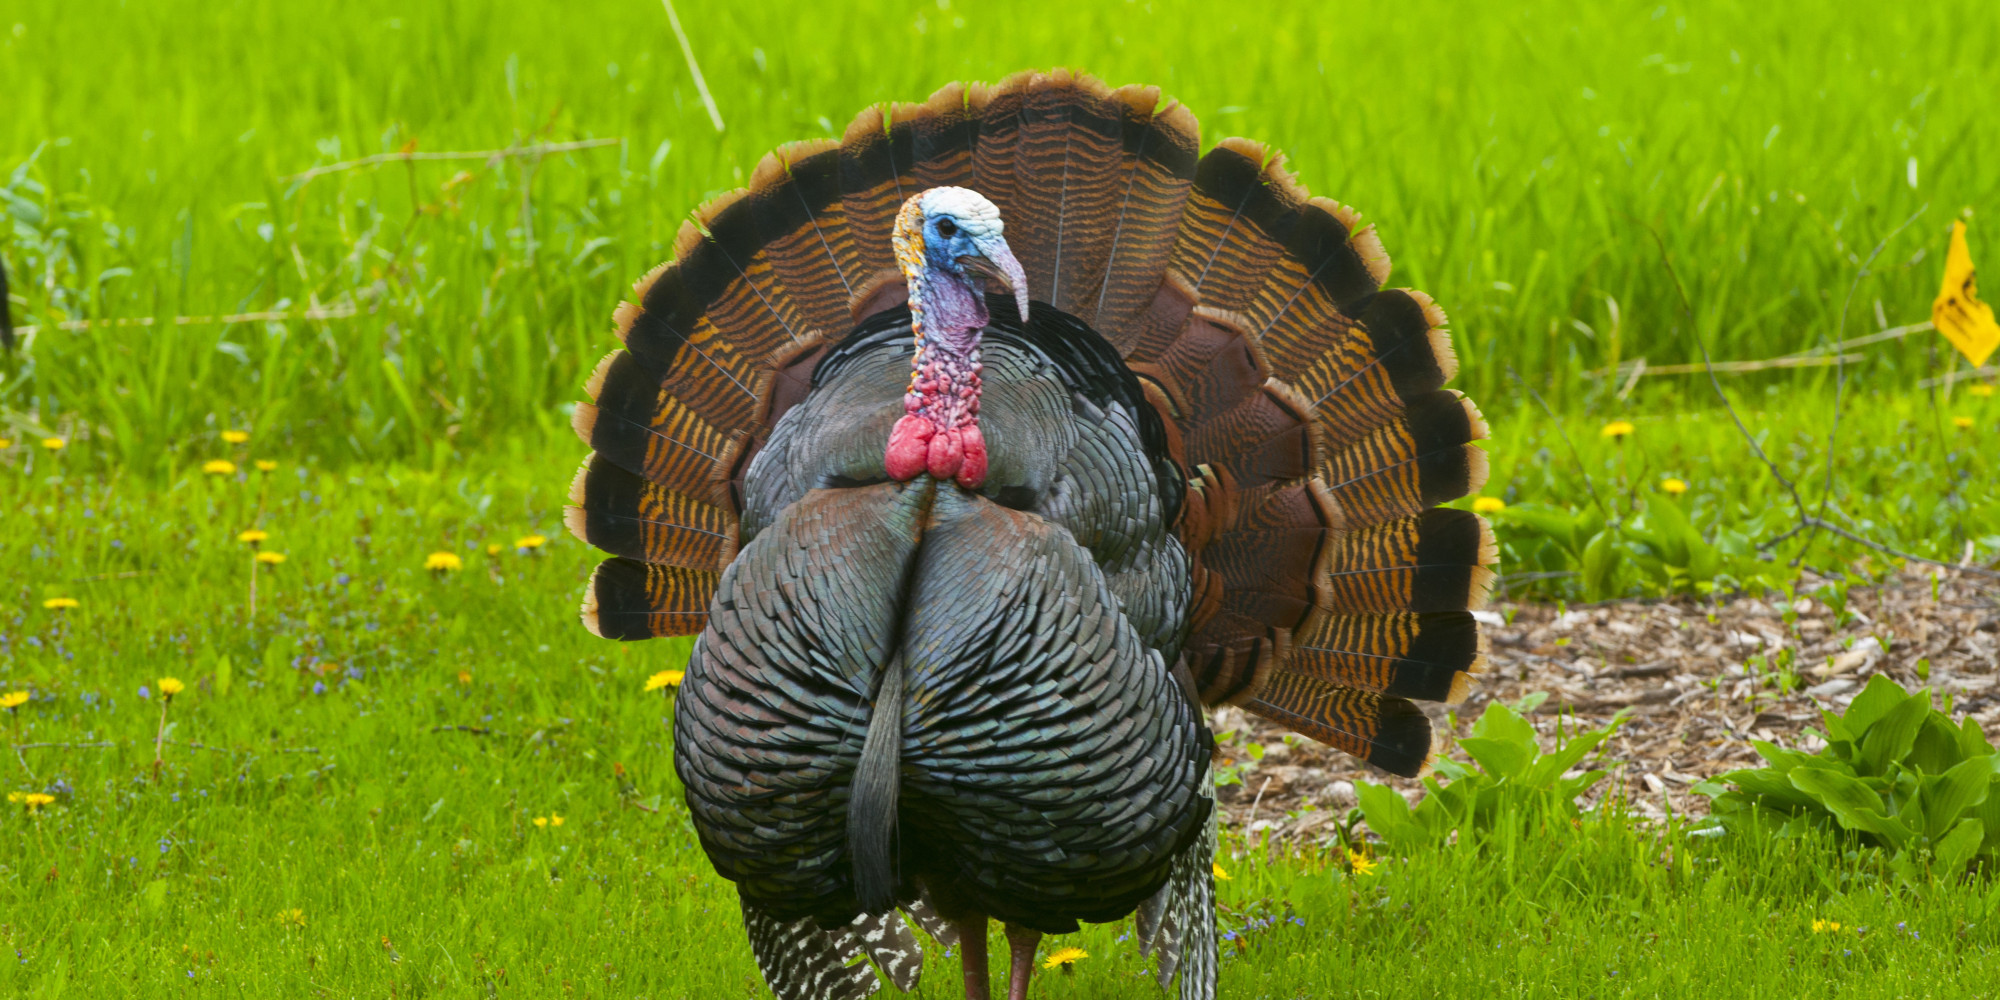 Pictures Of Turkey For Thanksgiving
 A Feast Ways To Support Humane Treatment Turkeys